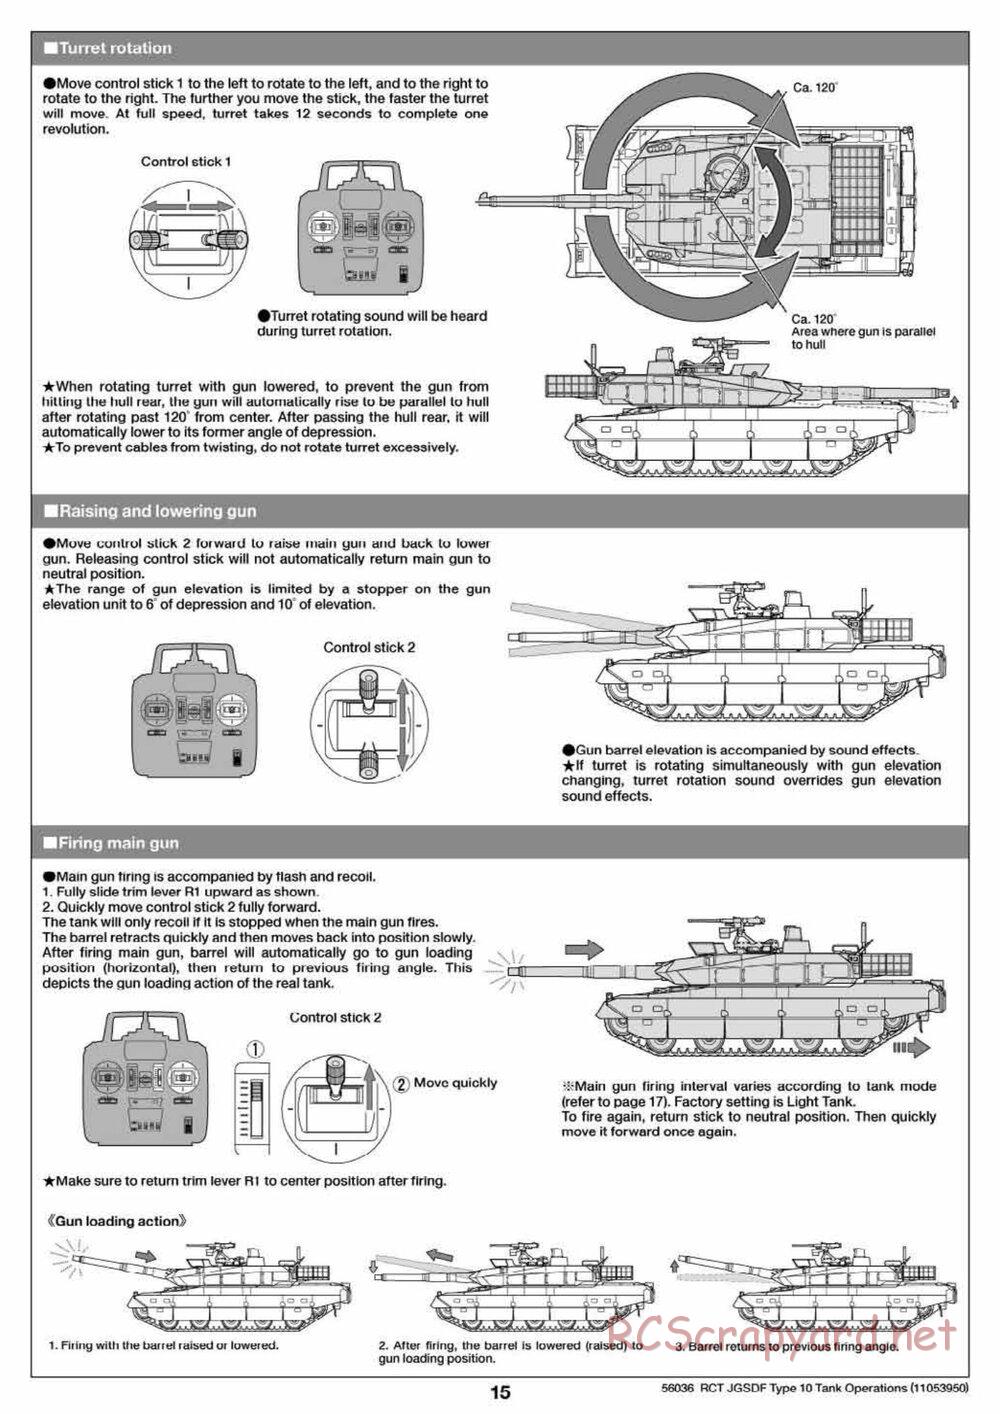 Tamiya - JGSDF Type 10 Tank - 1/16 Scale Chassis - Operation Manual - Page 5